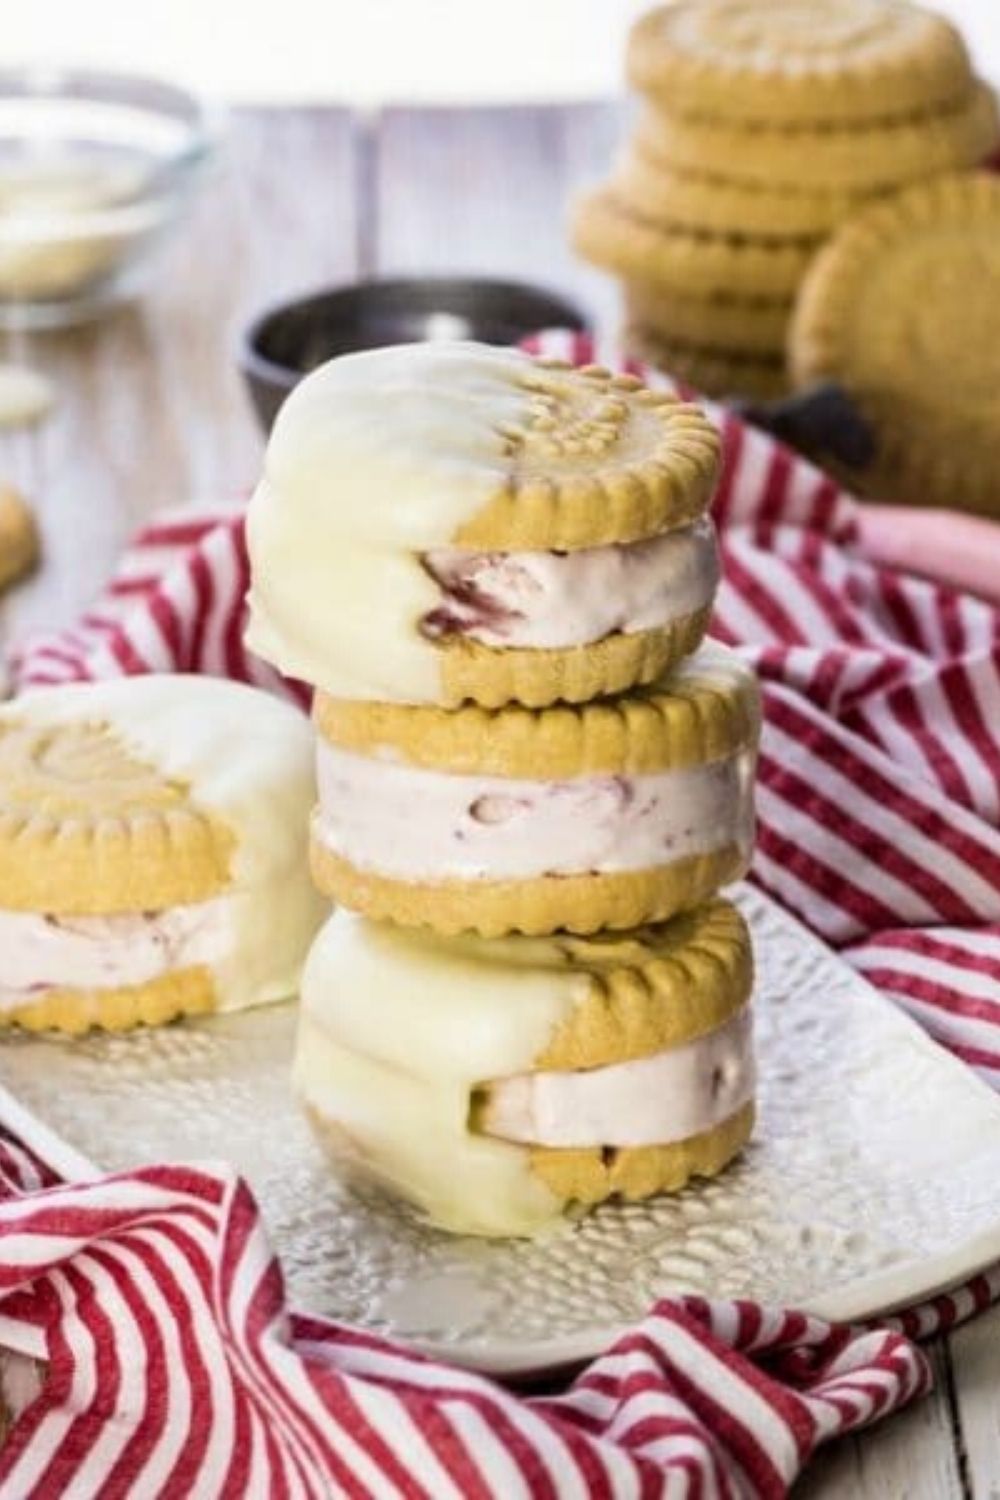 Strawberry Shortcake Ice Cream Sandwiches by The Cookie Rookie